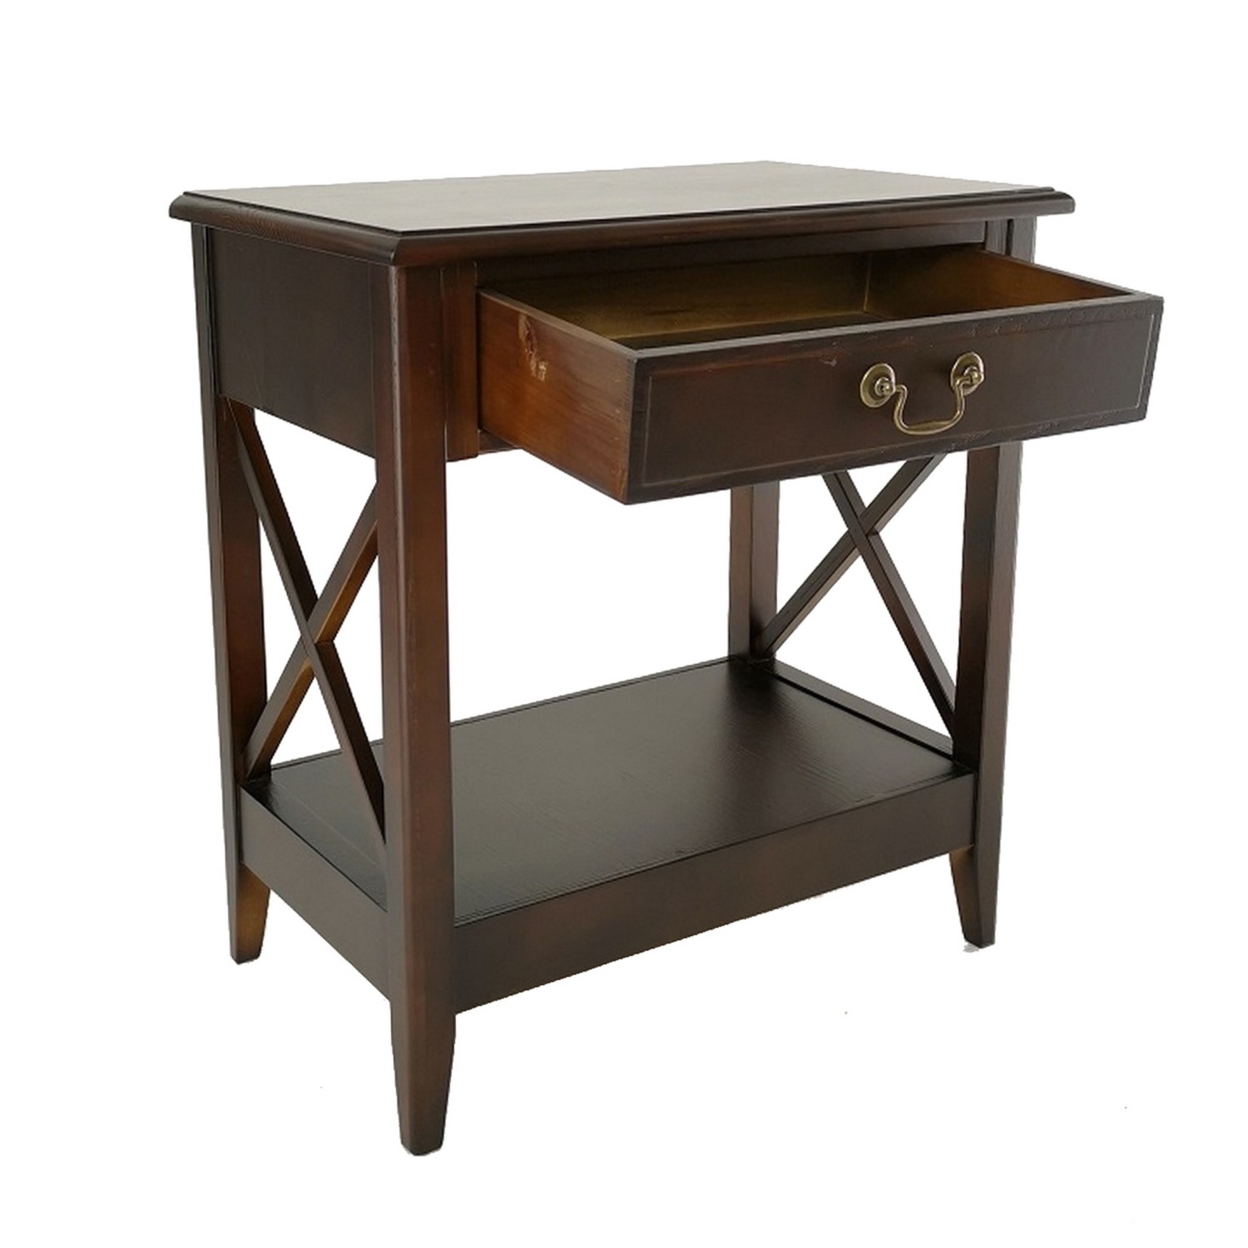 Nightstand With 1 Drawer And Criss Cross Sides, Espresso Brown- Saltoro Sherpi